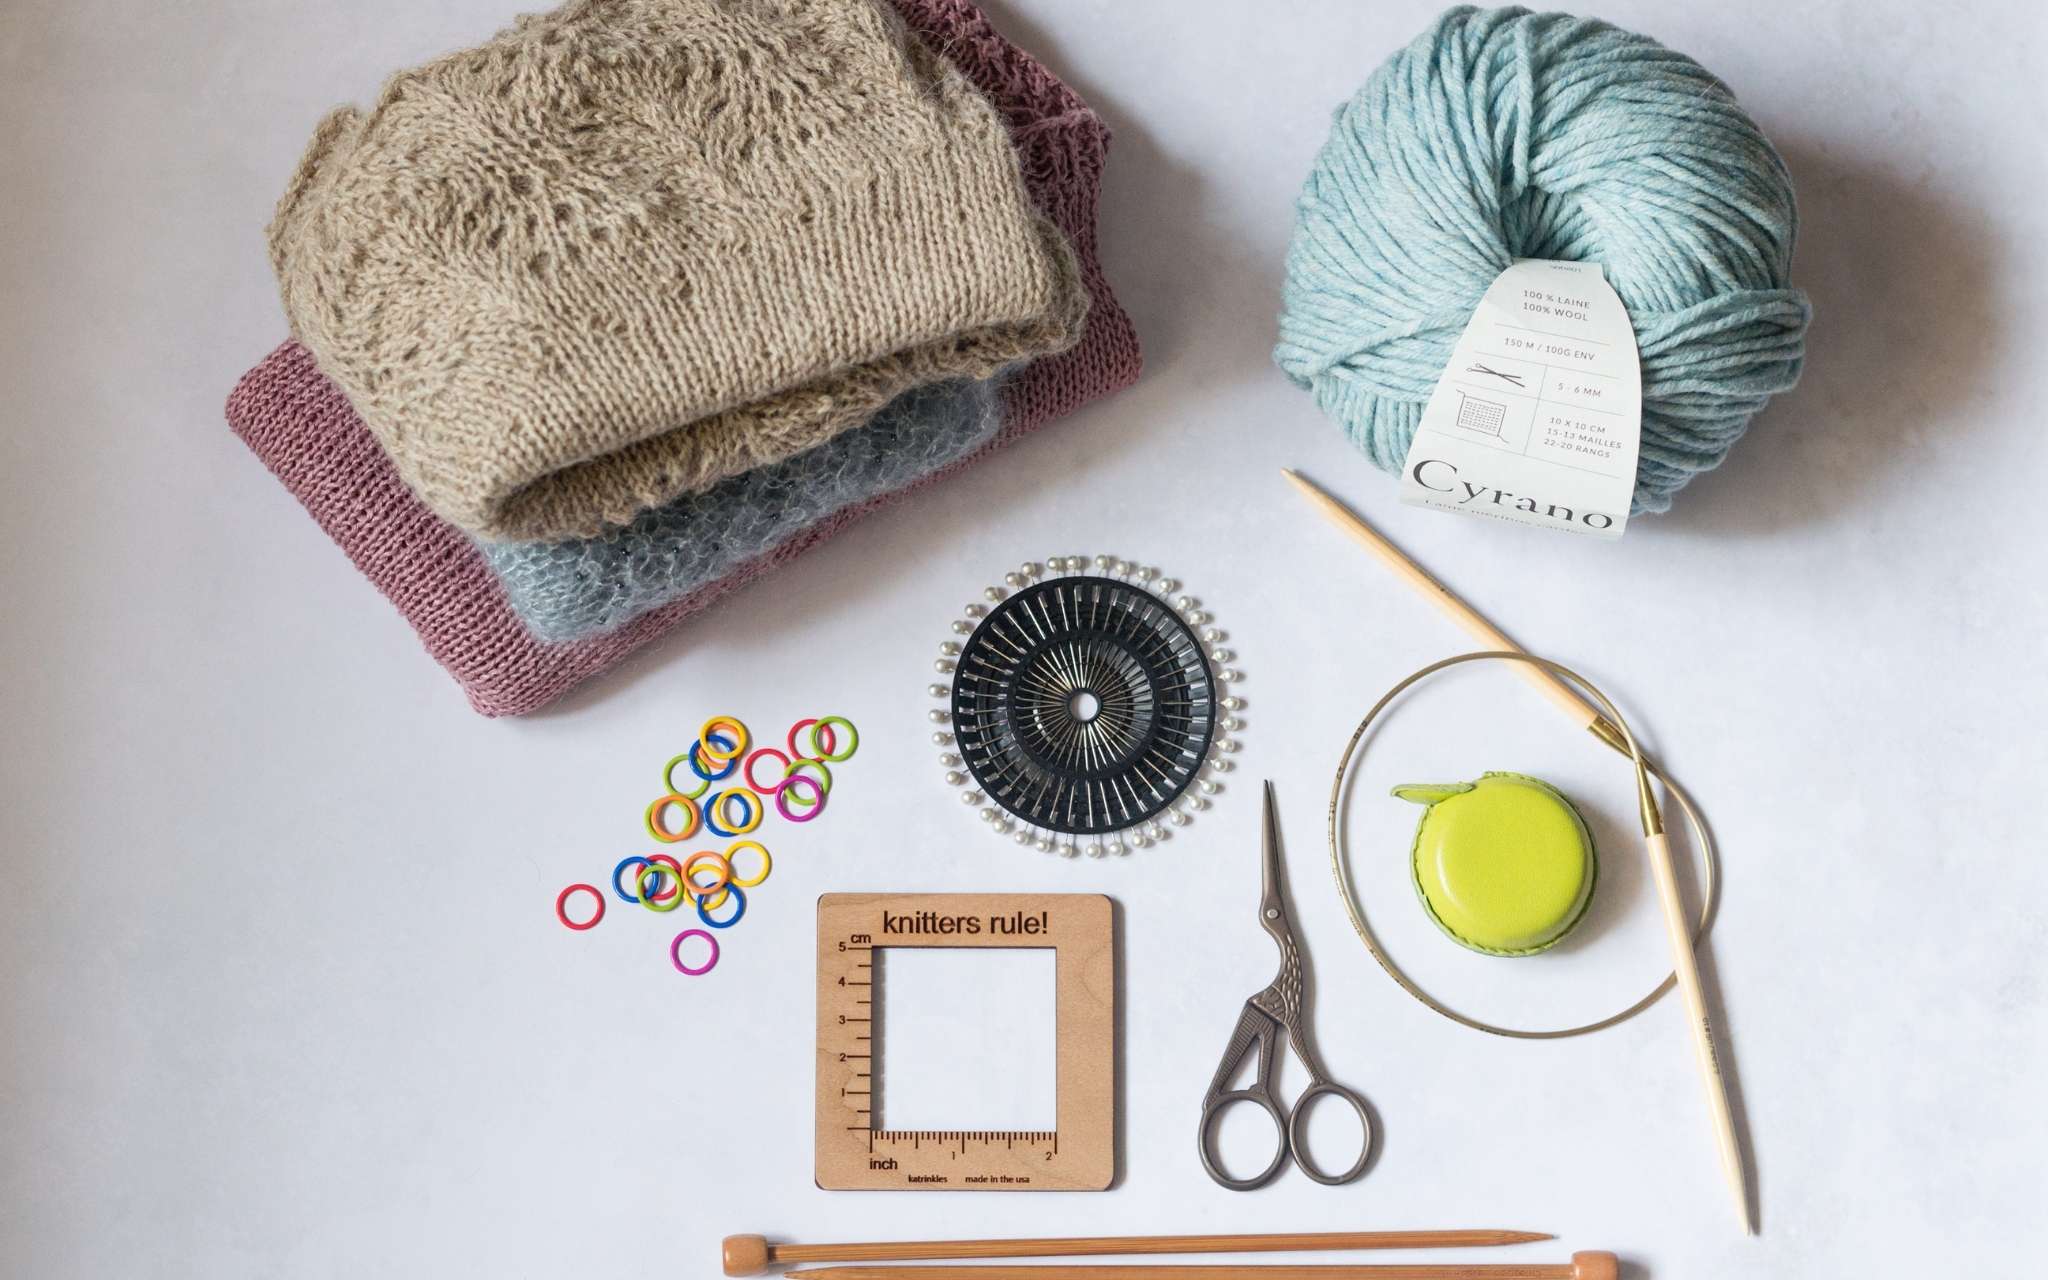 On a white flat surface lie a pile of knitted hats, a pale blue ball of yarn, straight and circular knitting needles, small scissors, a wooden square measuring tool and brightly coloured stitch markers.